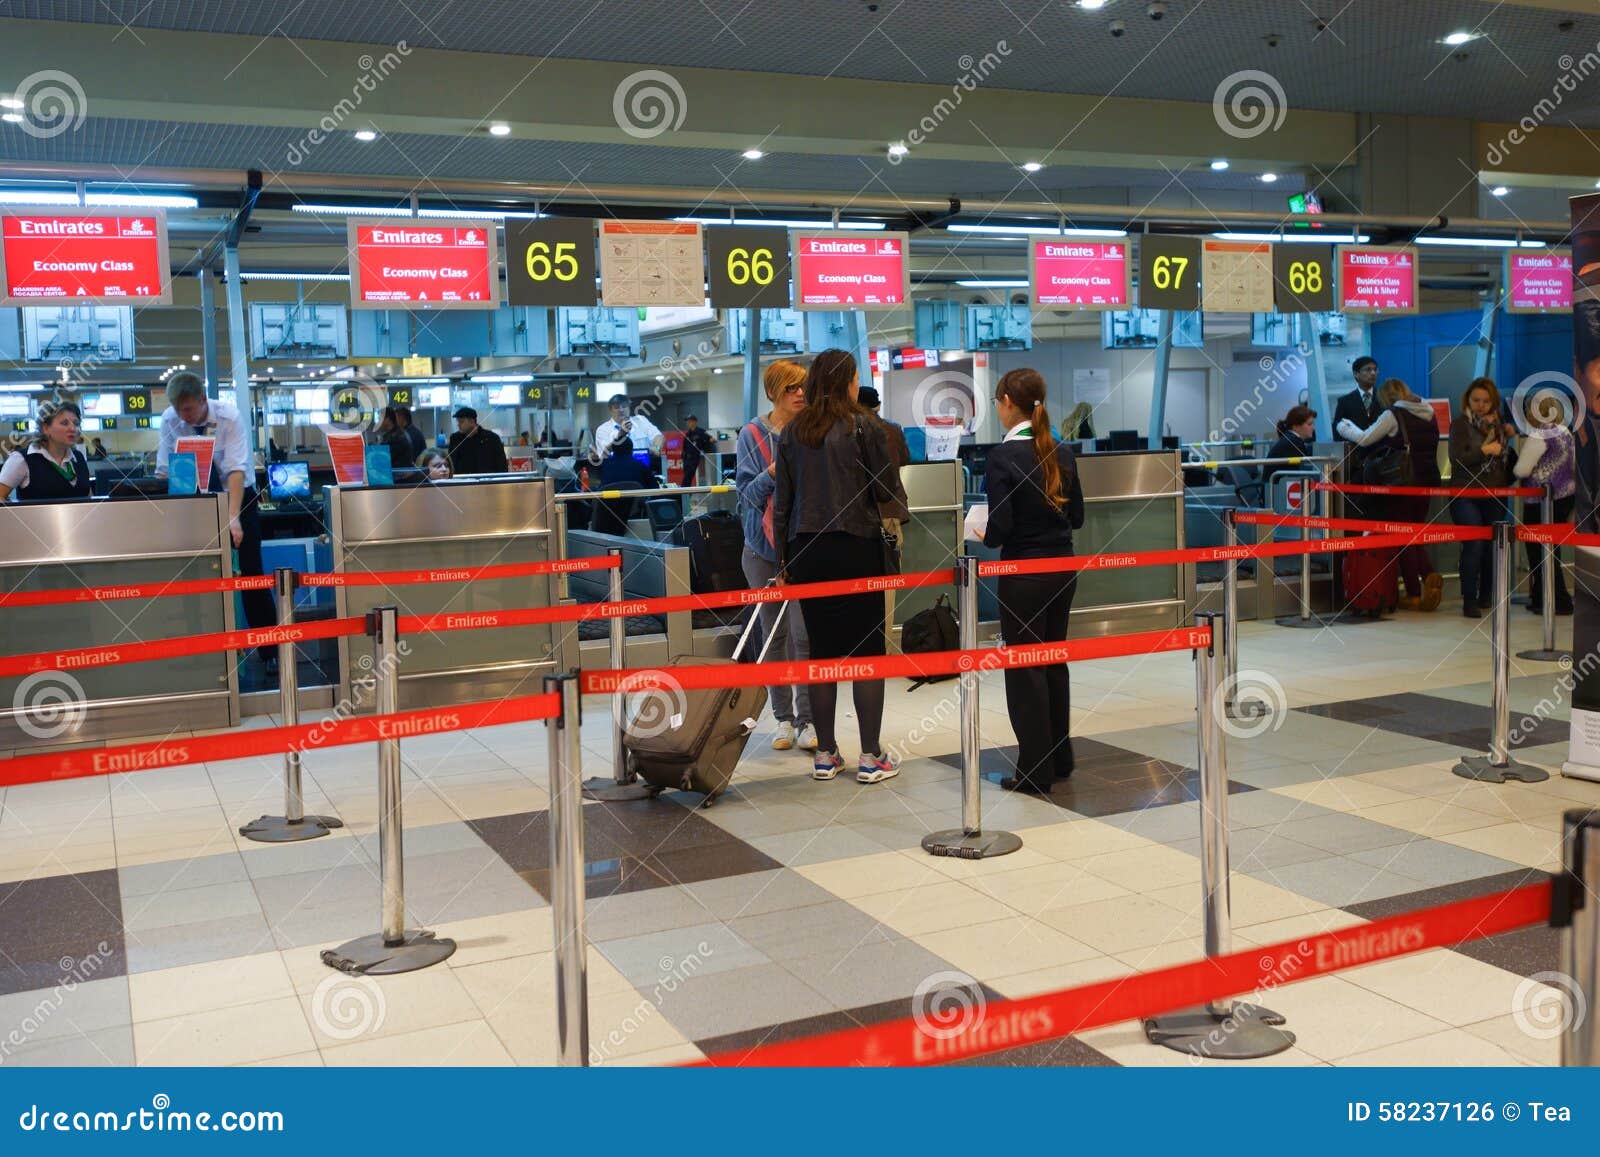 126 Chanel Dubai Airport Stock Photos - Free & Royalty-Free Stock Photos  from Dreamstime